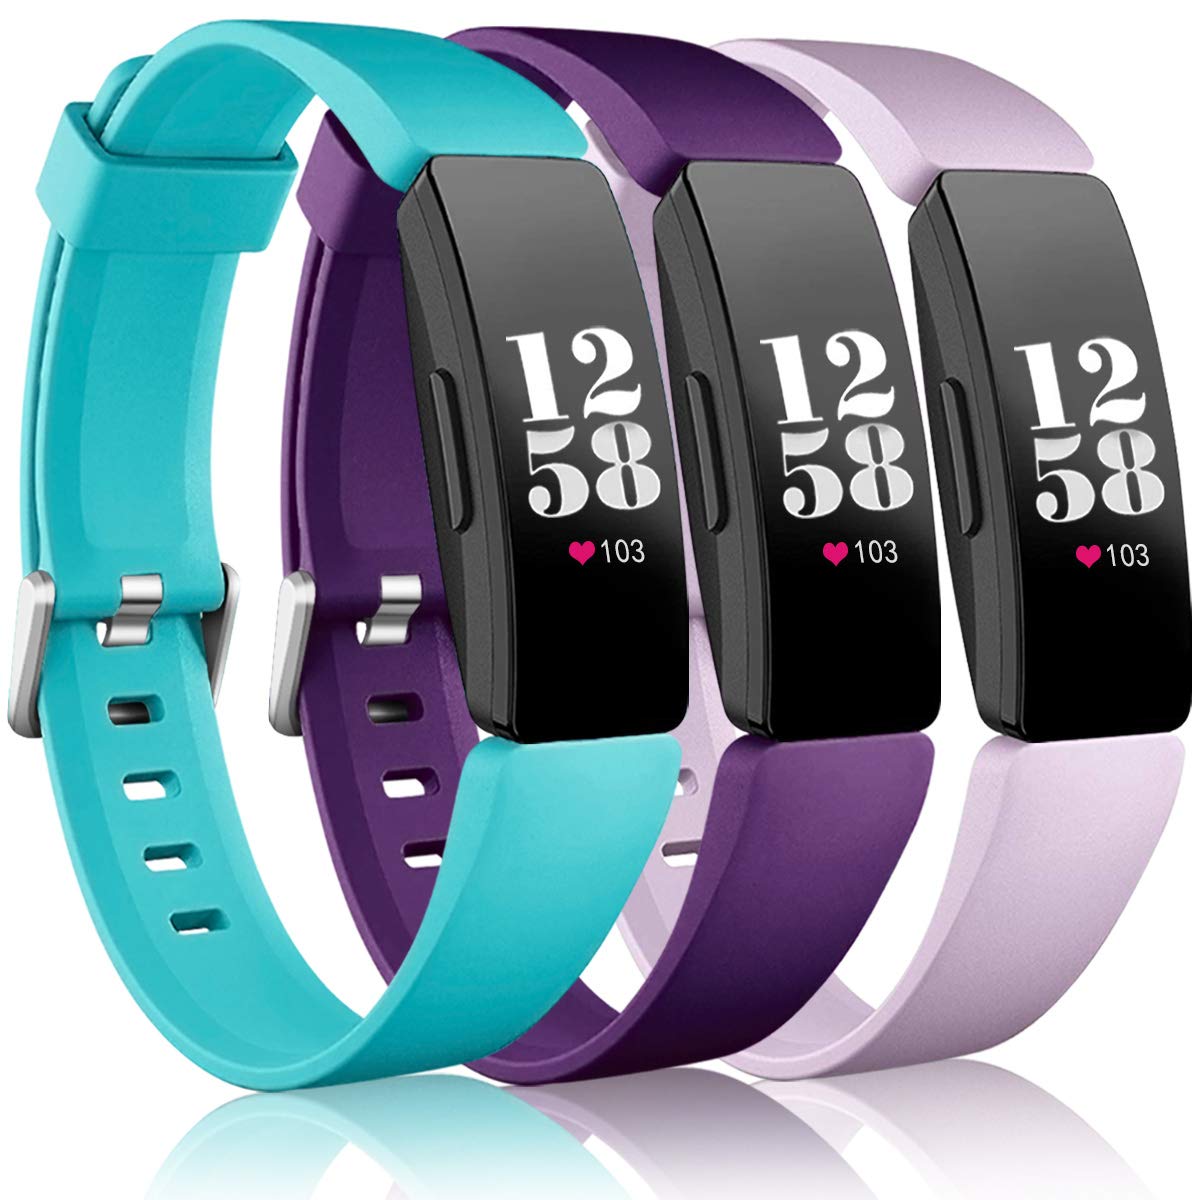 Book Cover Wepro Bands Compatible Fitbit Inspire HR/Inspire/Inspire 2/Ace 2 for Women Men, Small, Replacement Wristband Sports Strap Band for Fitbit Ace 2 & Inspire Fitness Tracker, Teal, Plum, Lilac